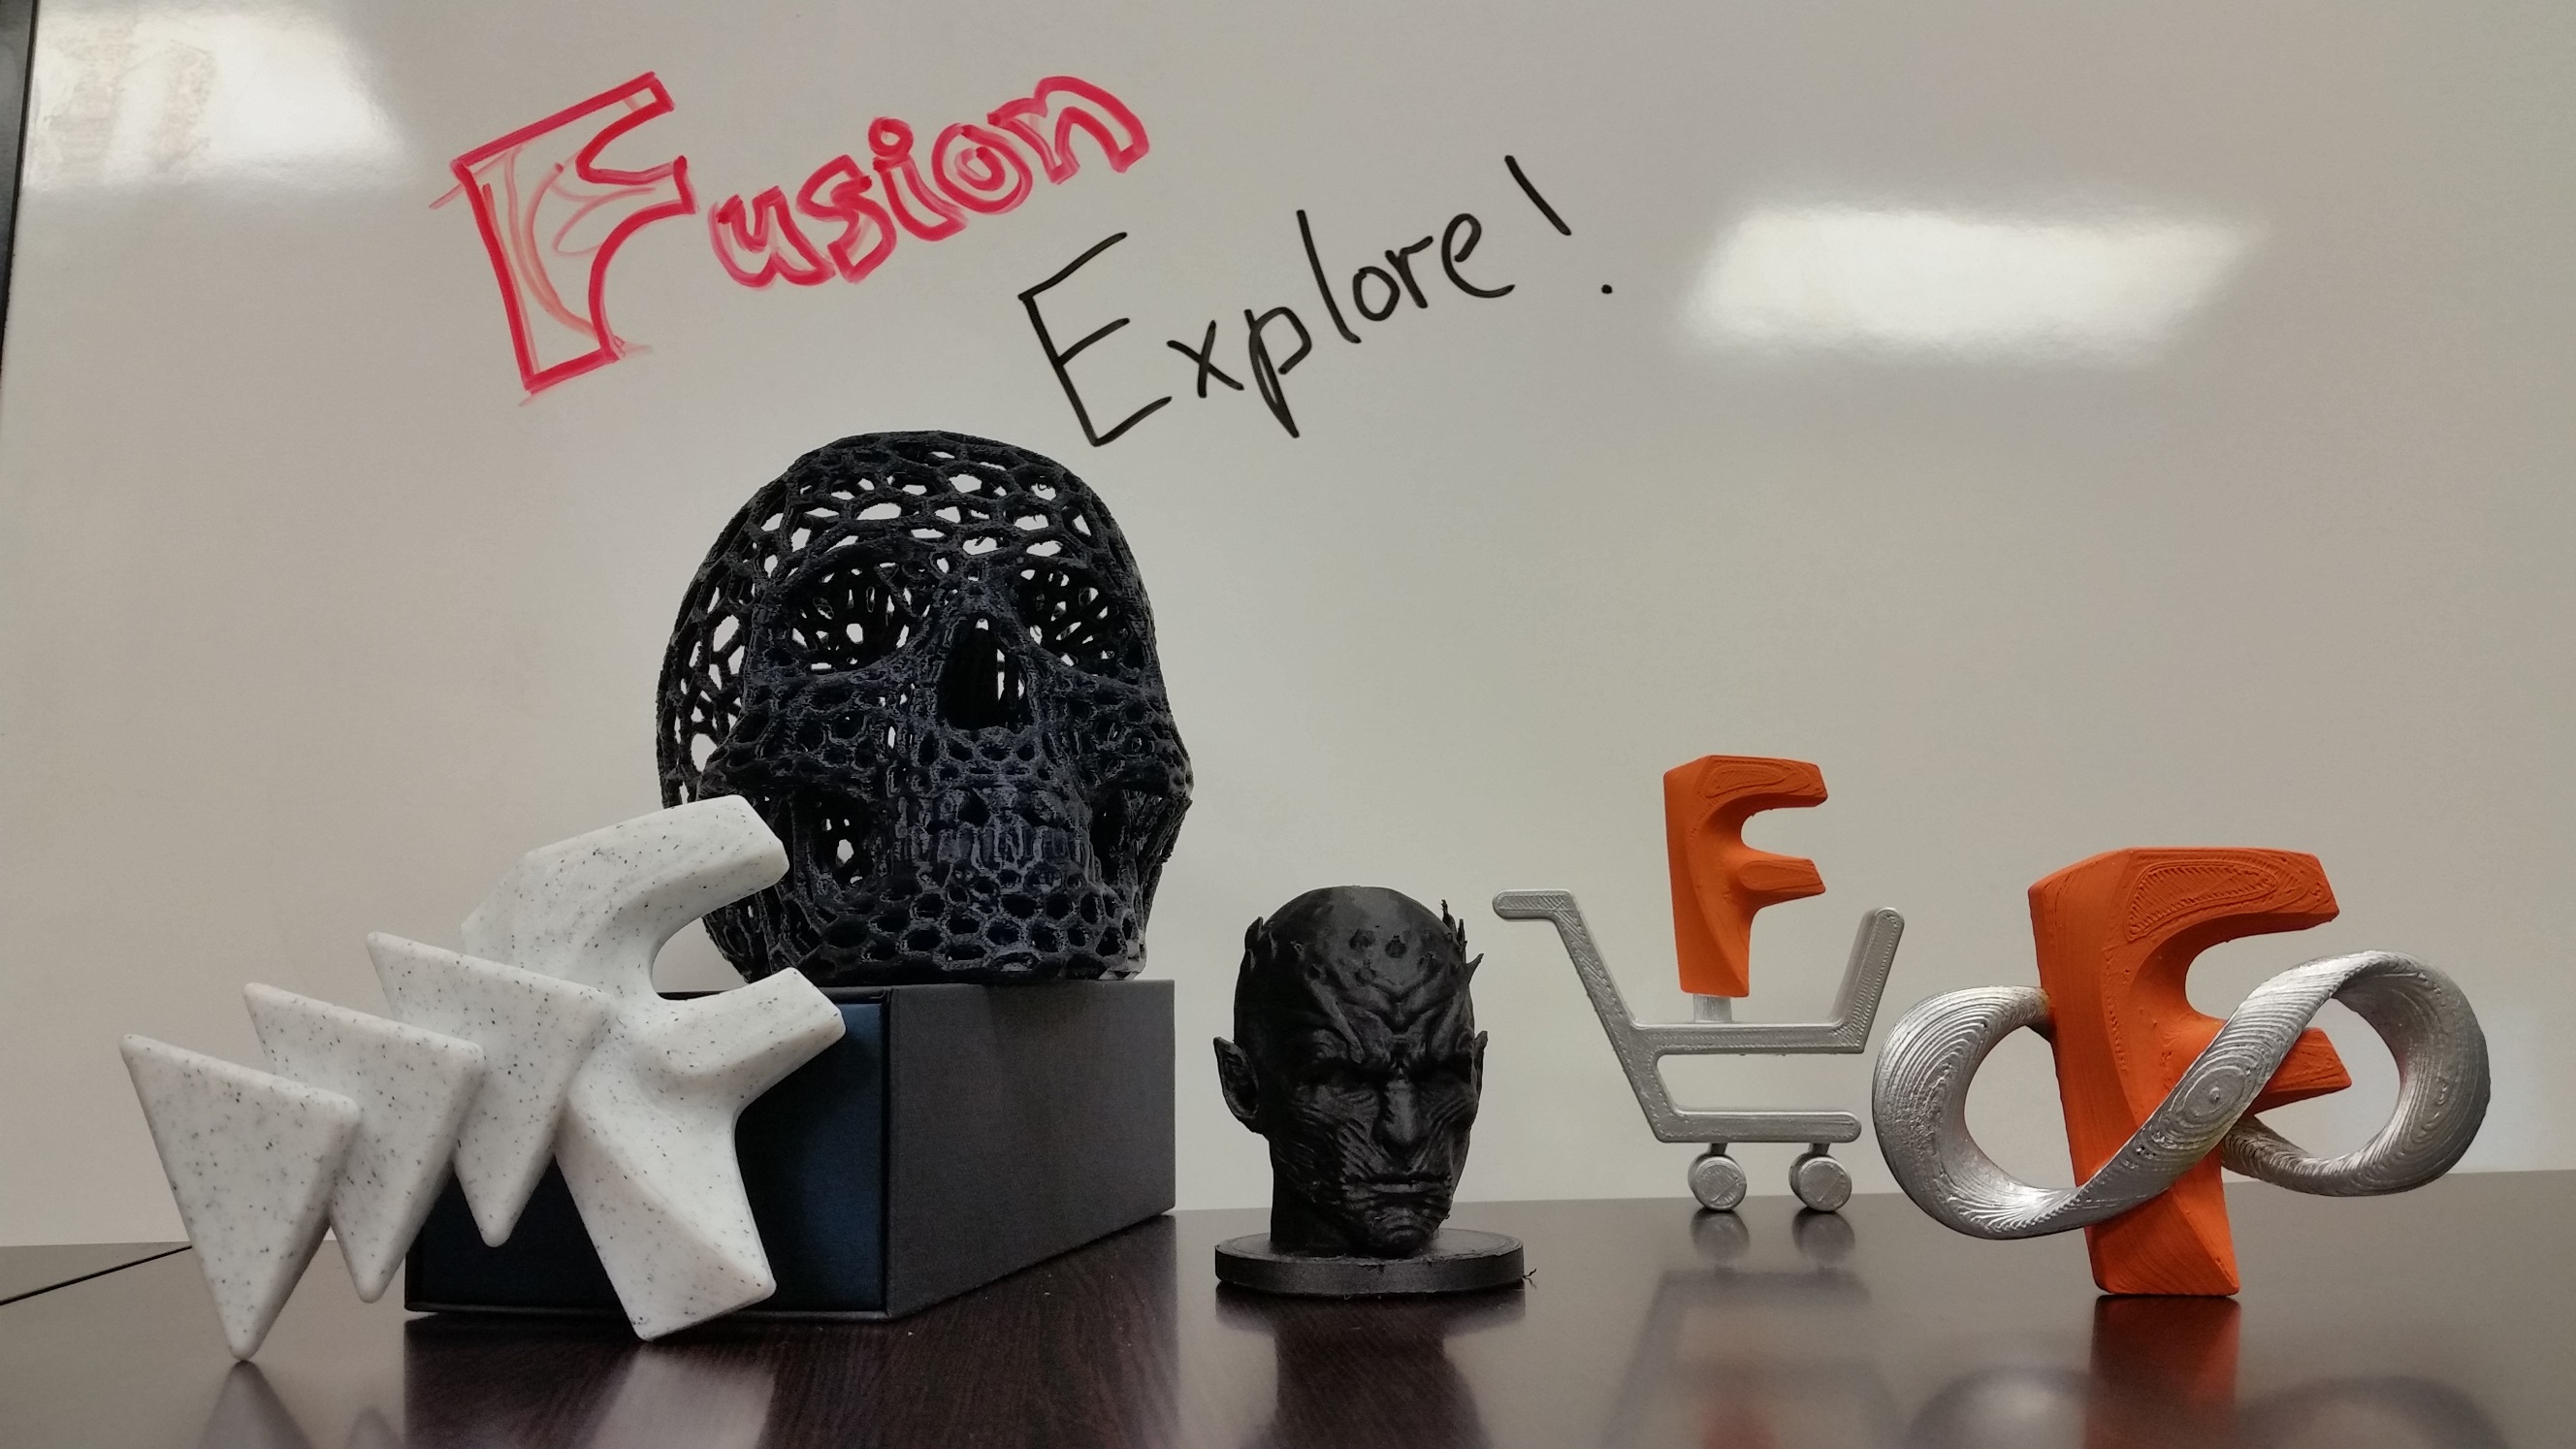 Tune into D3's blog posts to explore Autodesk Fusion 360 with us